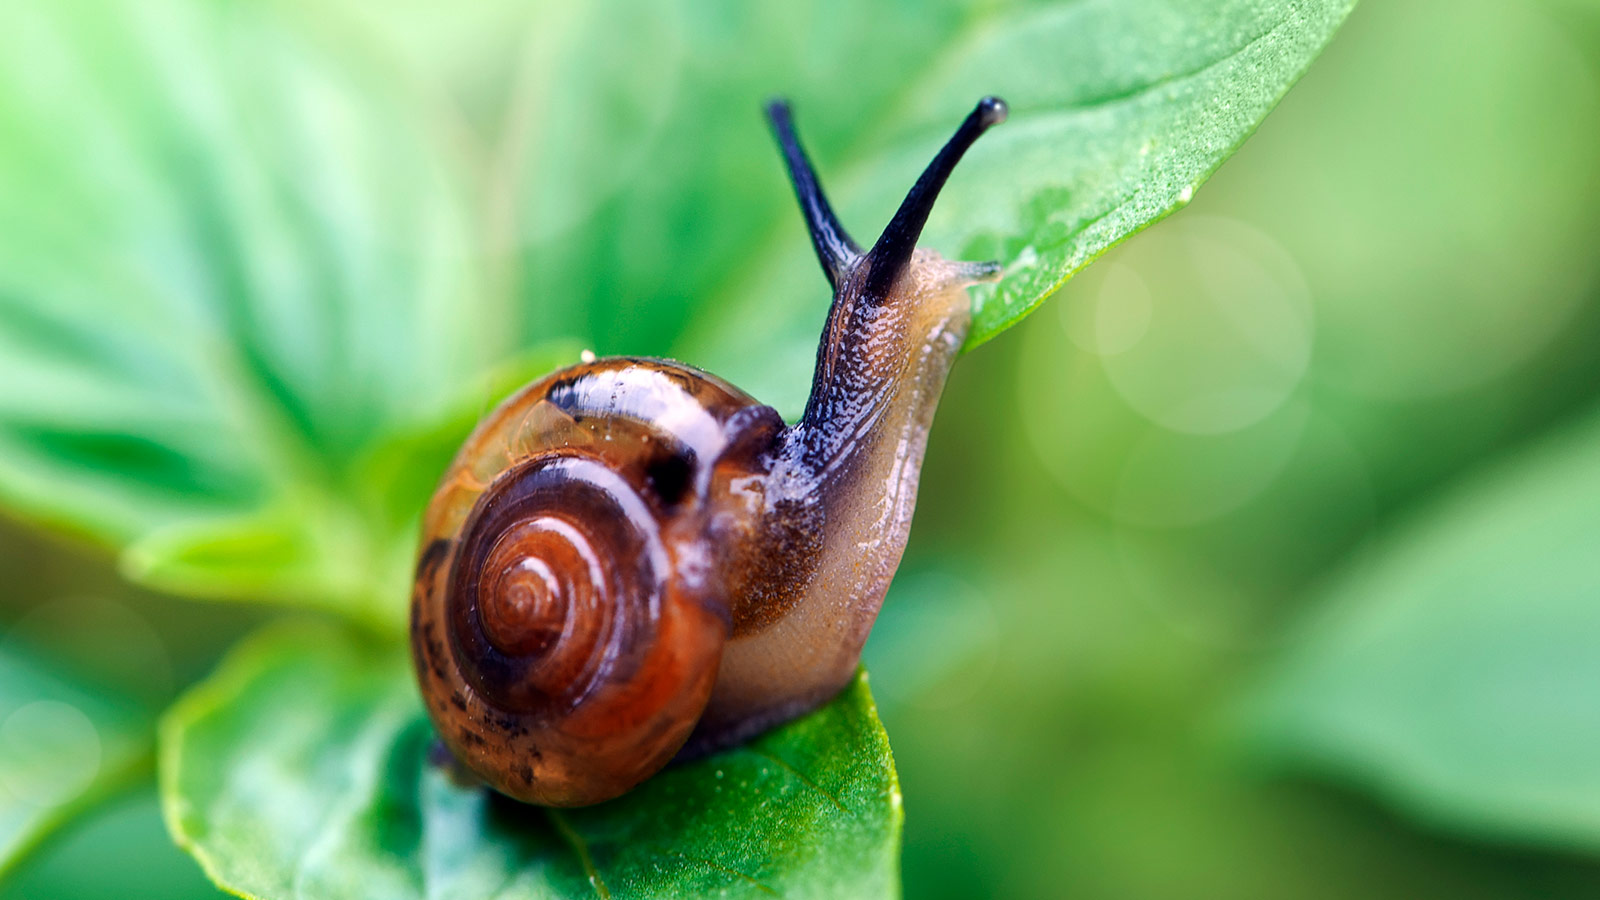 how long for a snail to travel a mile